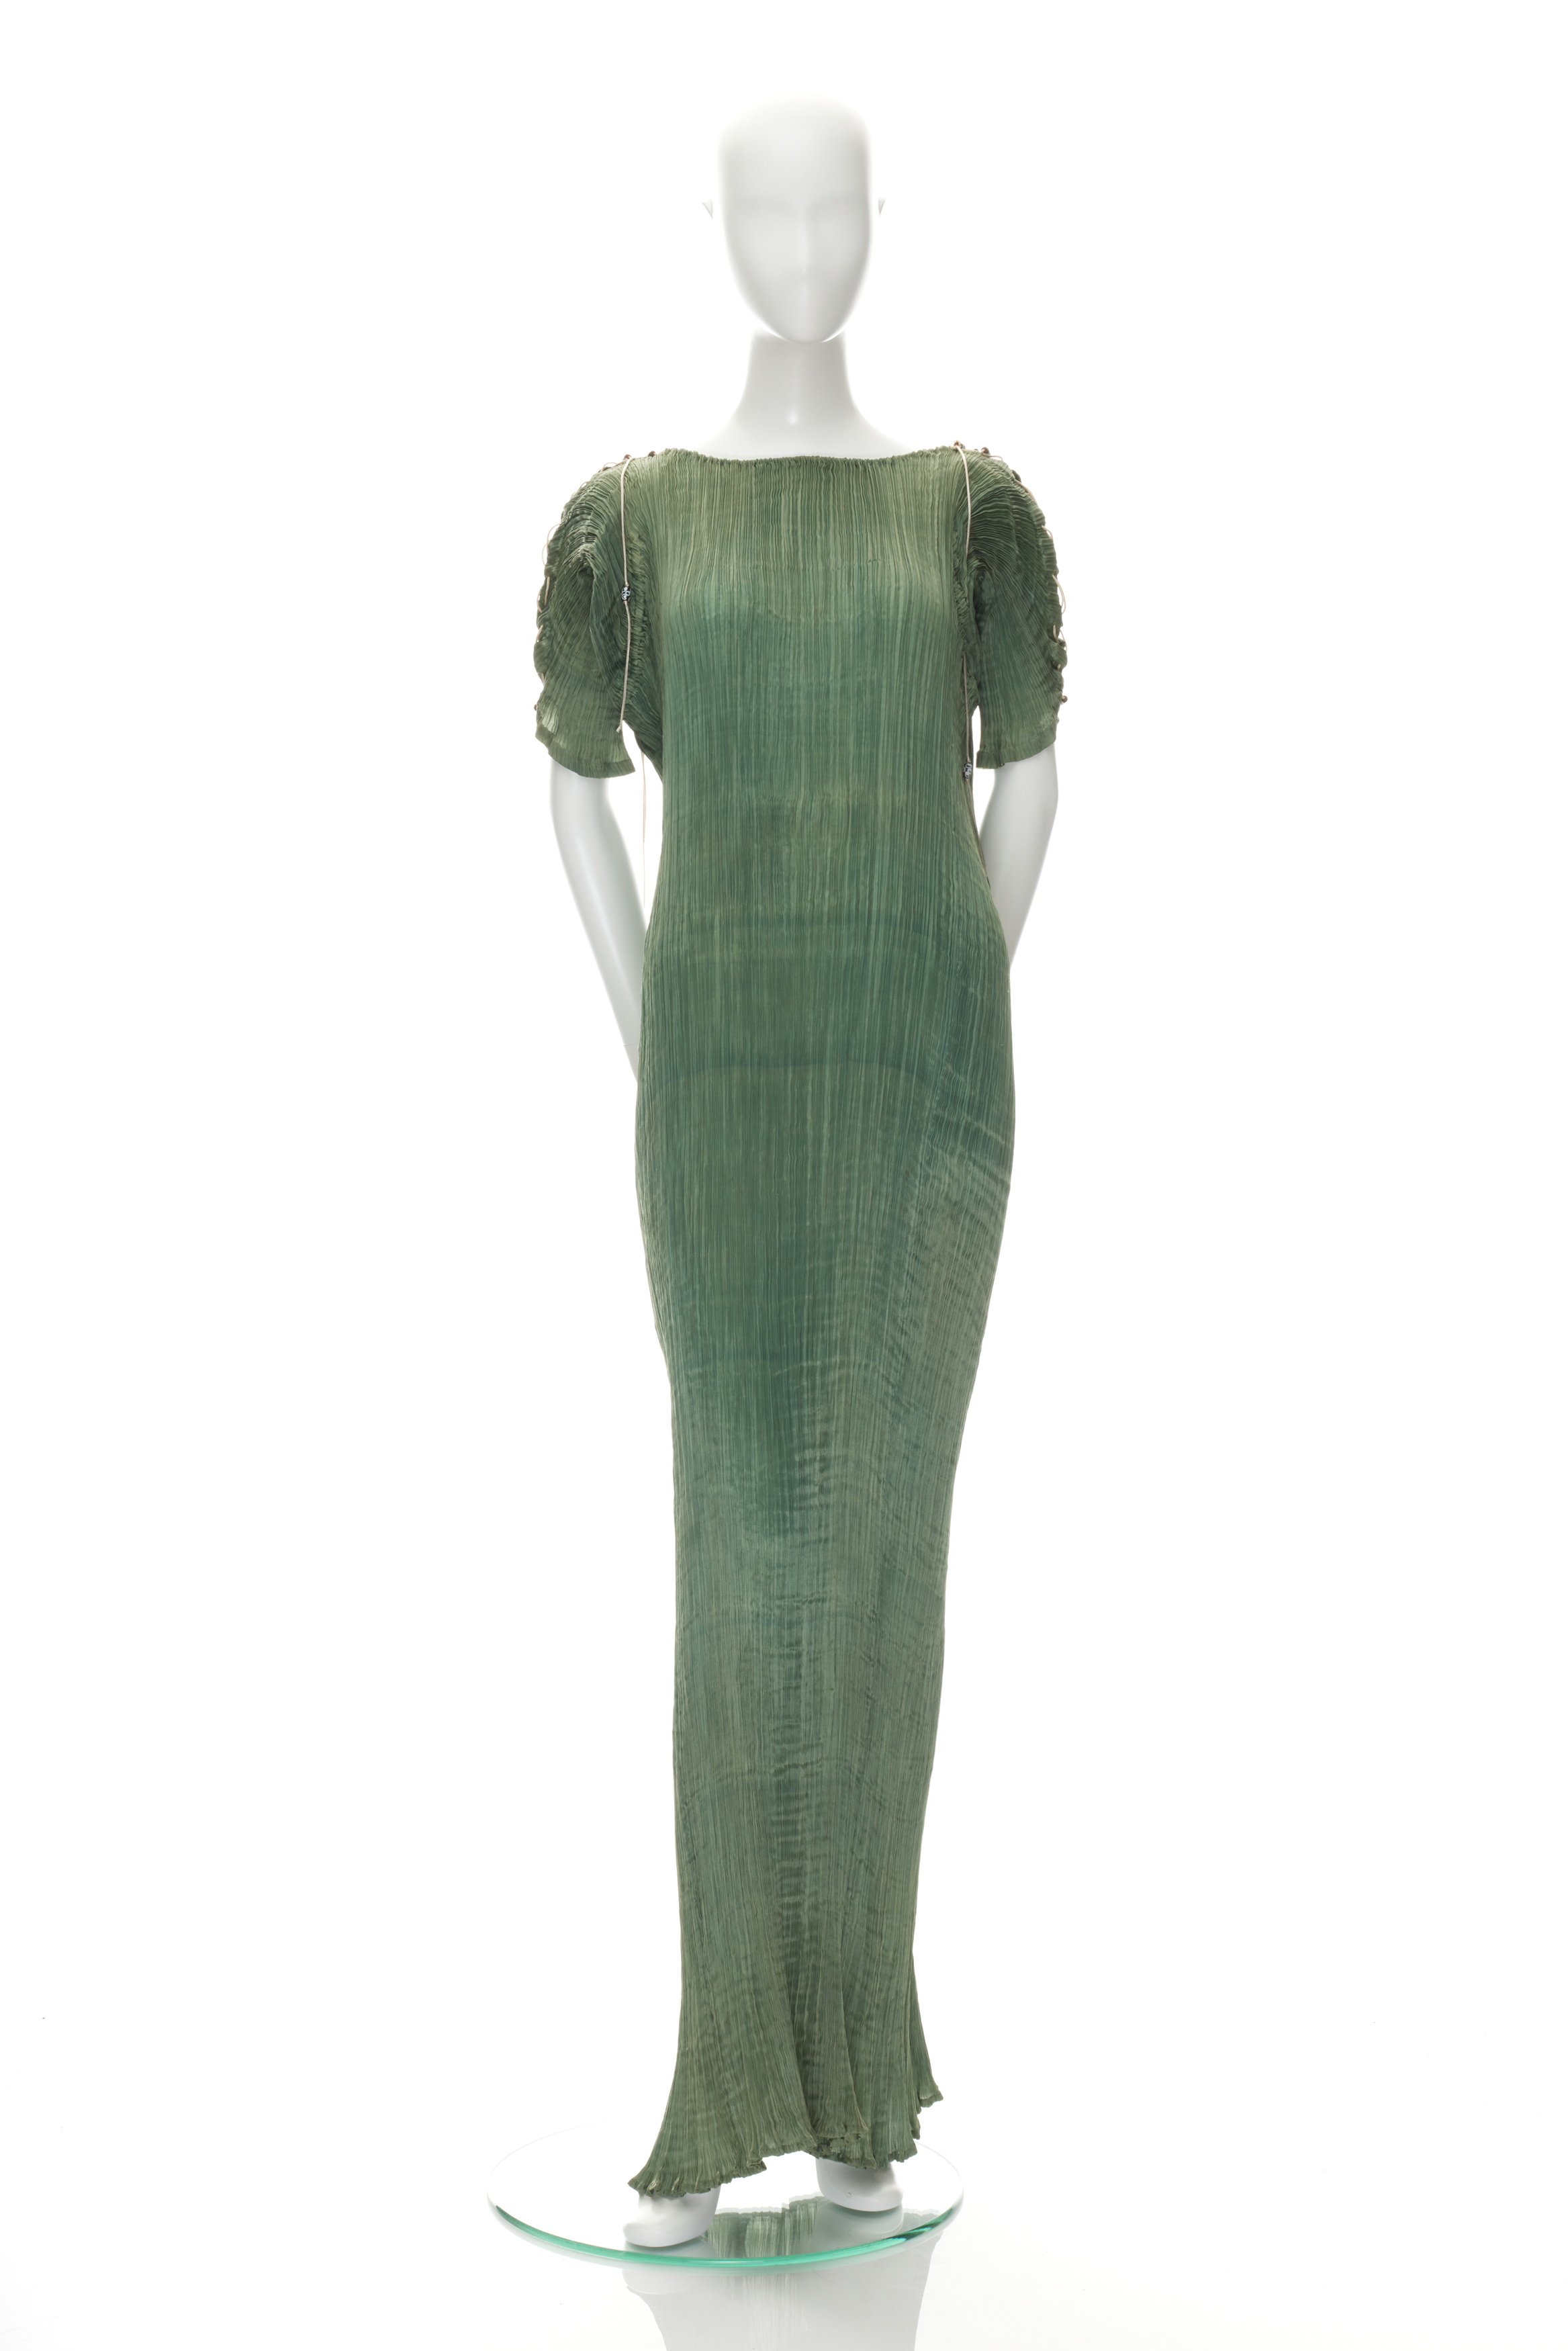 'Delphos' evening dress by Mariano Fortuny